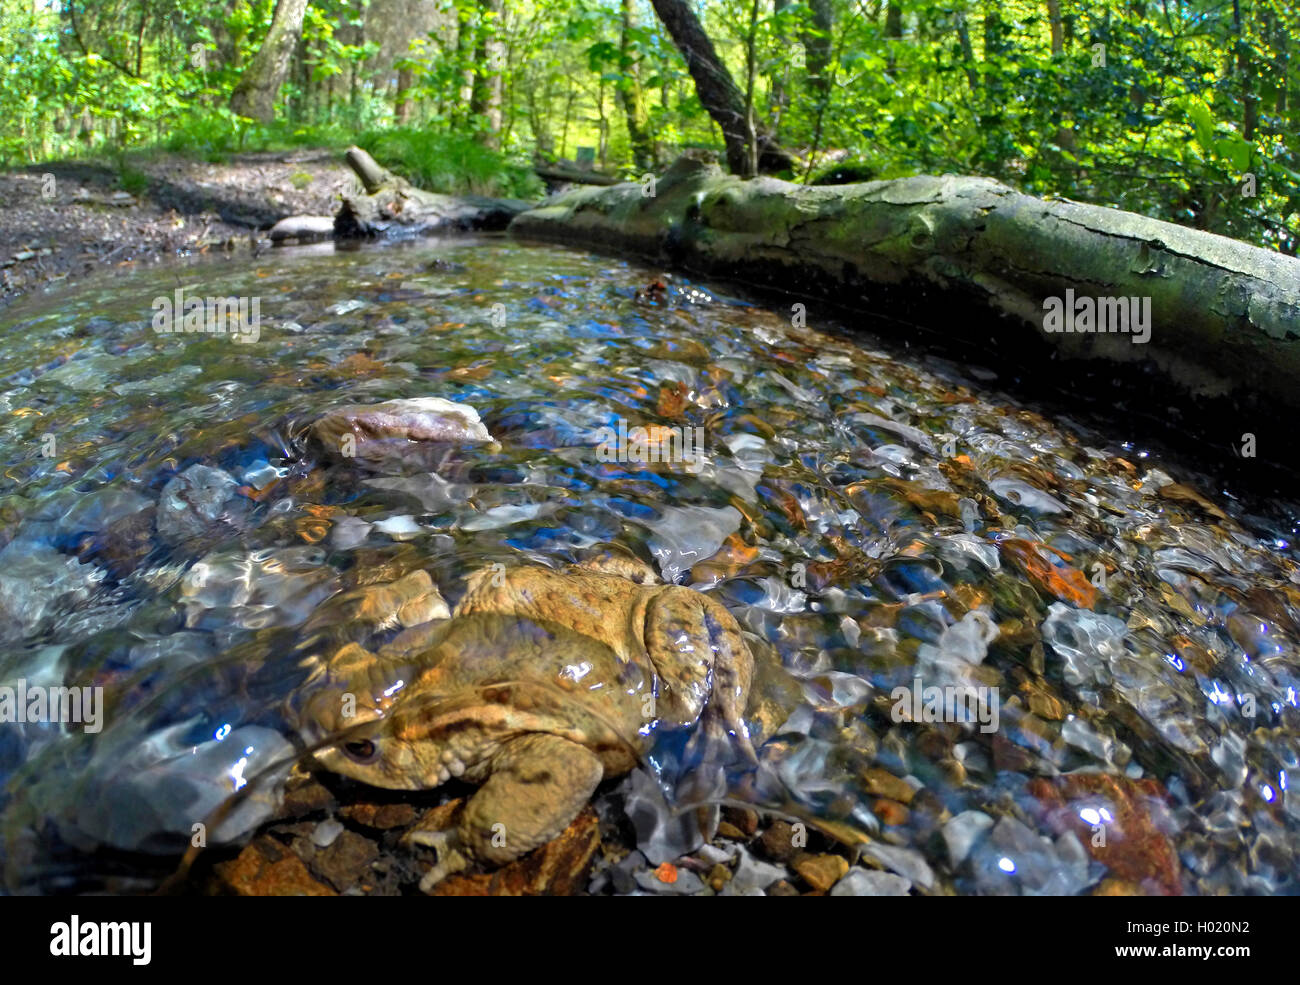 European common toad (Bufo bufo), in a brook, wideangle photography, Germany, North Rhine-Westphalia Stock Photo